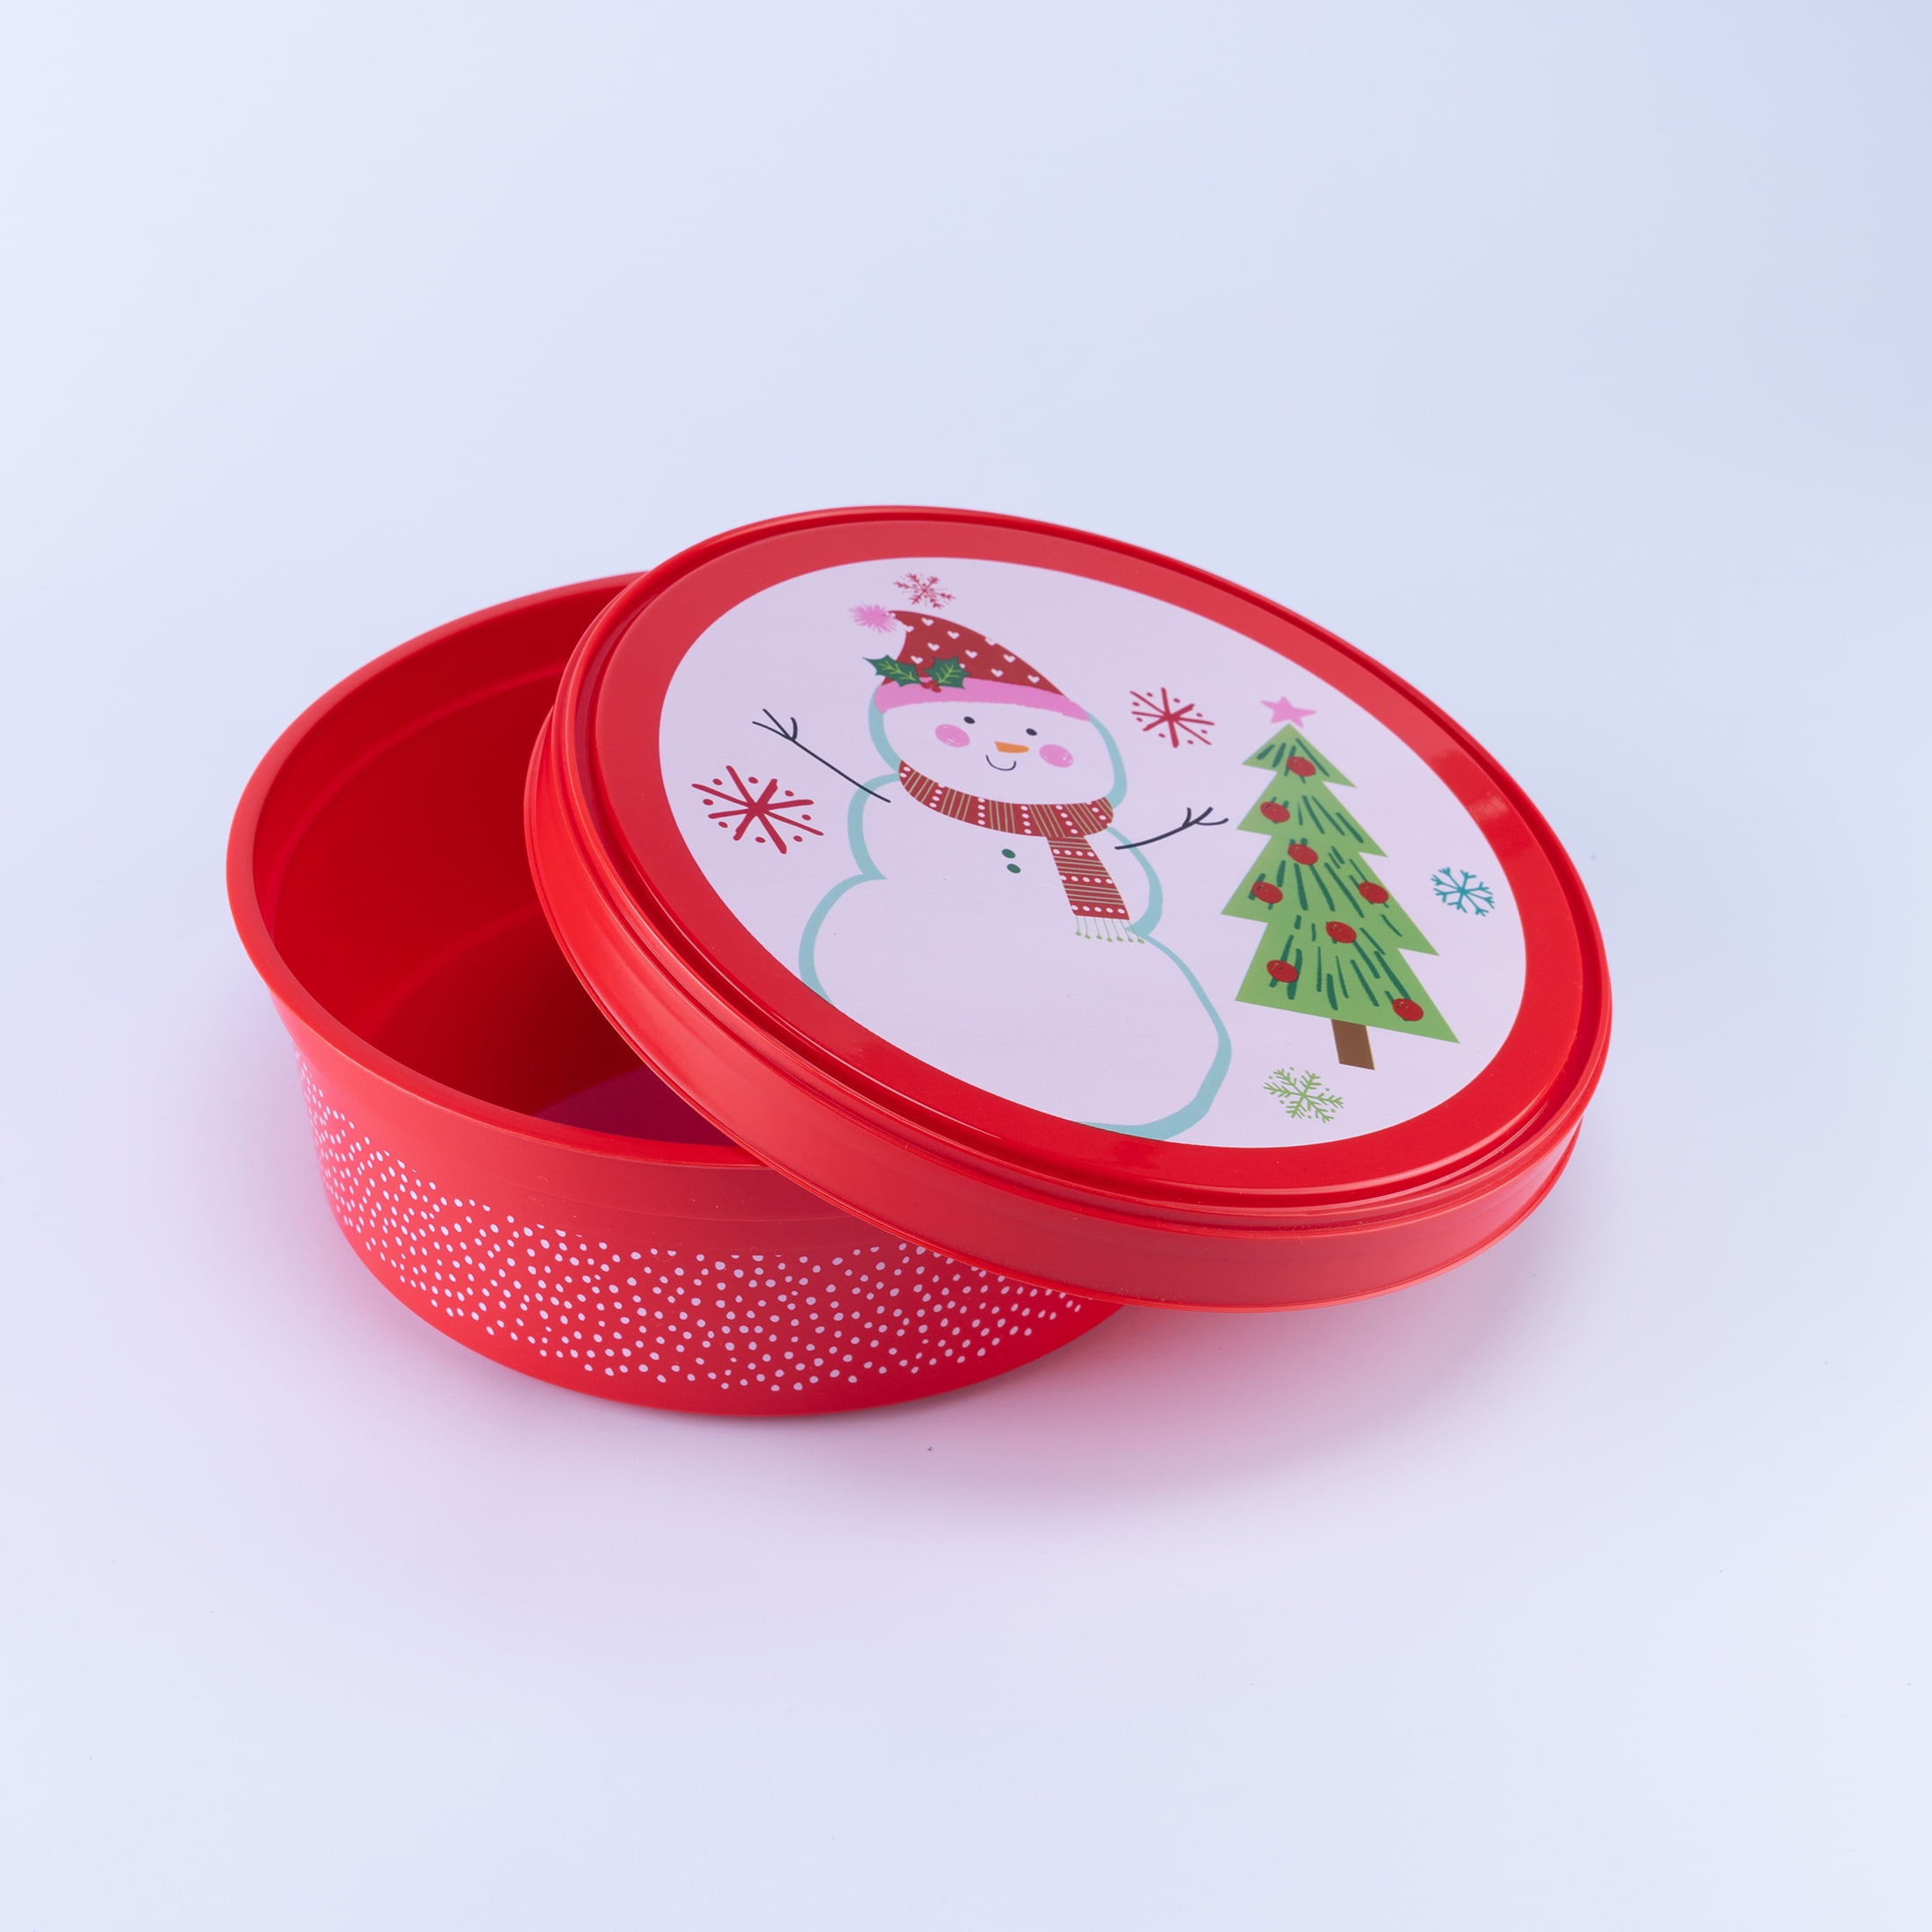 Free: Tupperware Xmas Snowman Round Cookie Snack Canister 3421A Red Lid  Vintage New Condition - Kitchen -  Auctions for Free Stuff